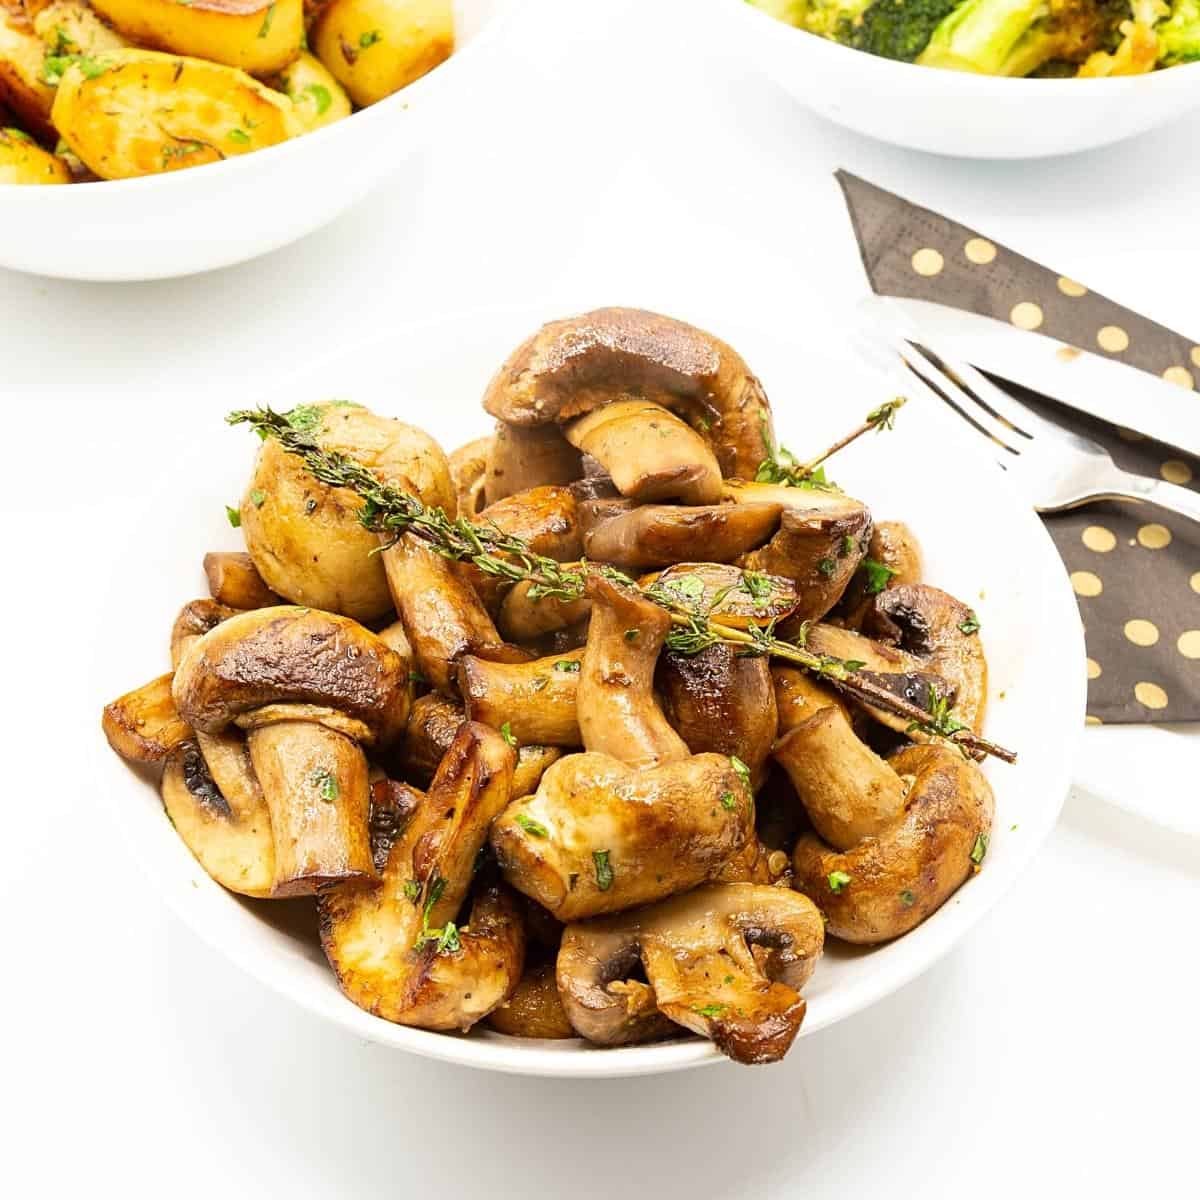 A bowl with sauteed mushrooms.